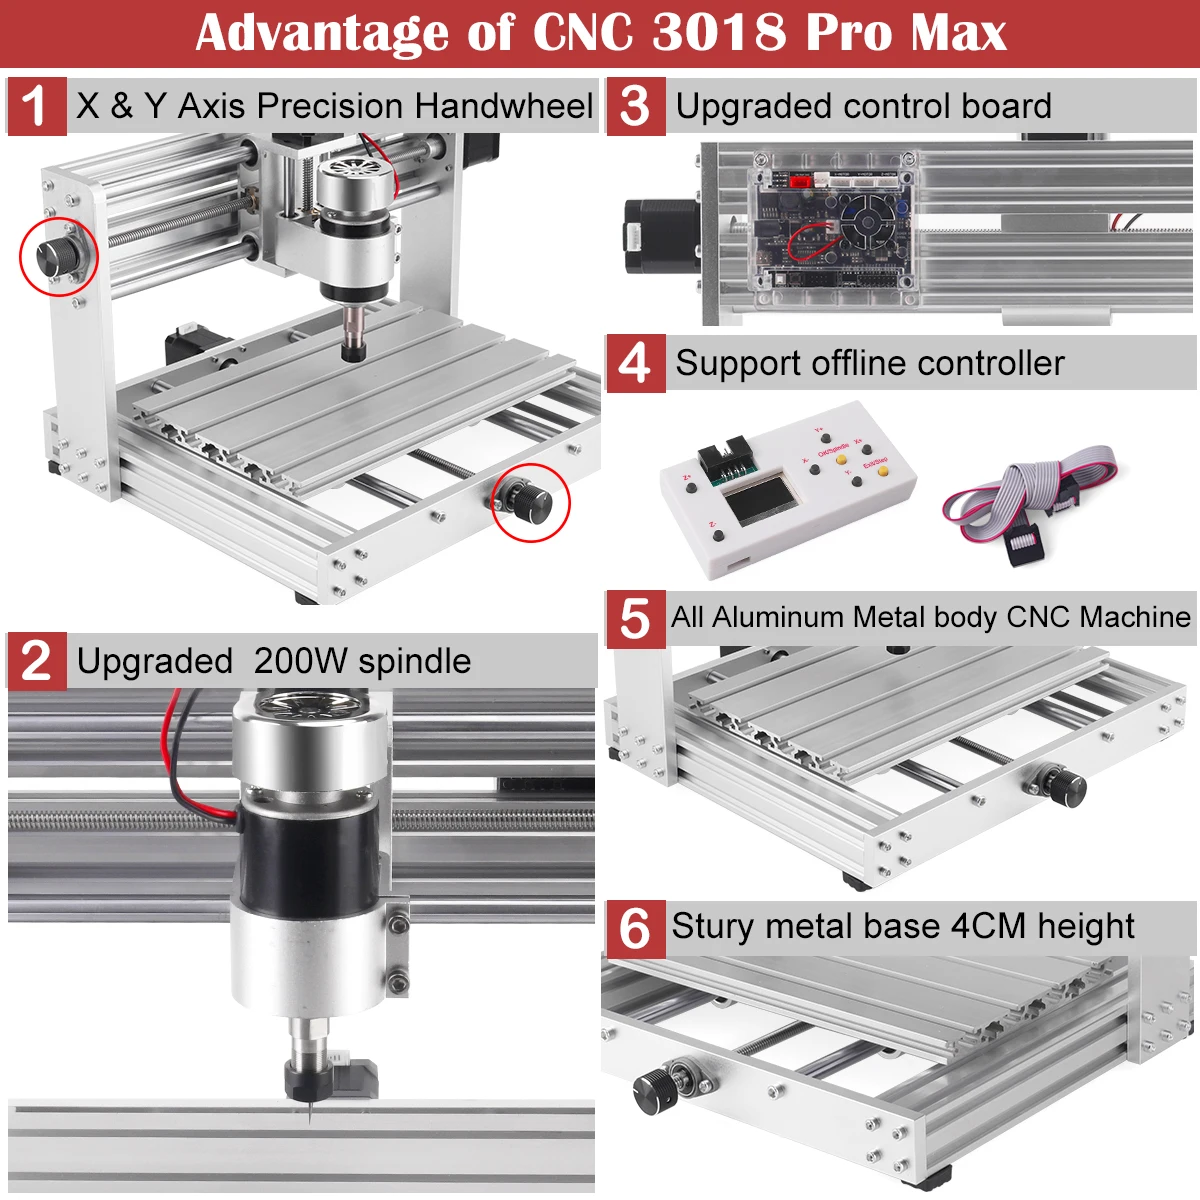 CNC 3018 MAX Laser Engraver GRBL Control with 200W Spindle 3-Axis PCB Milling Machine Metal Engraving Machine CNC Router enlarge